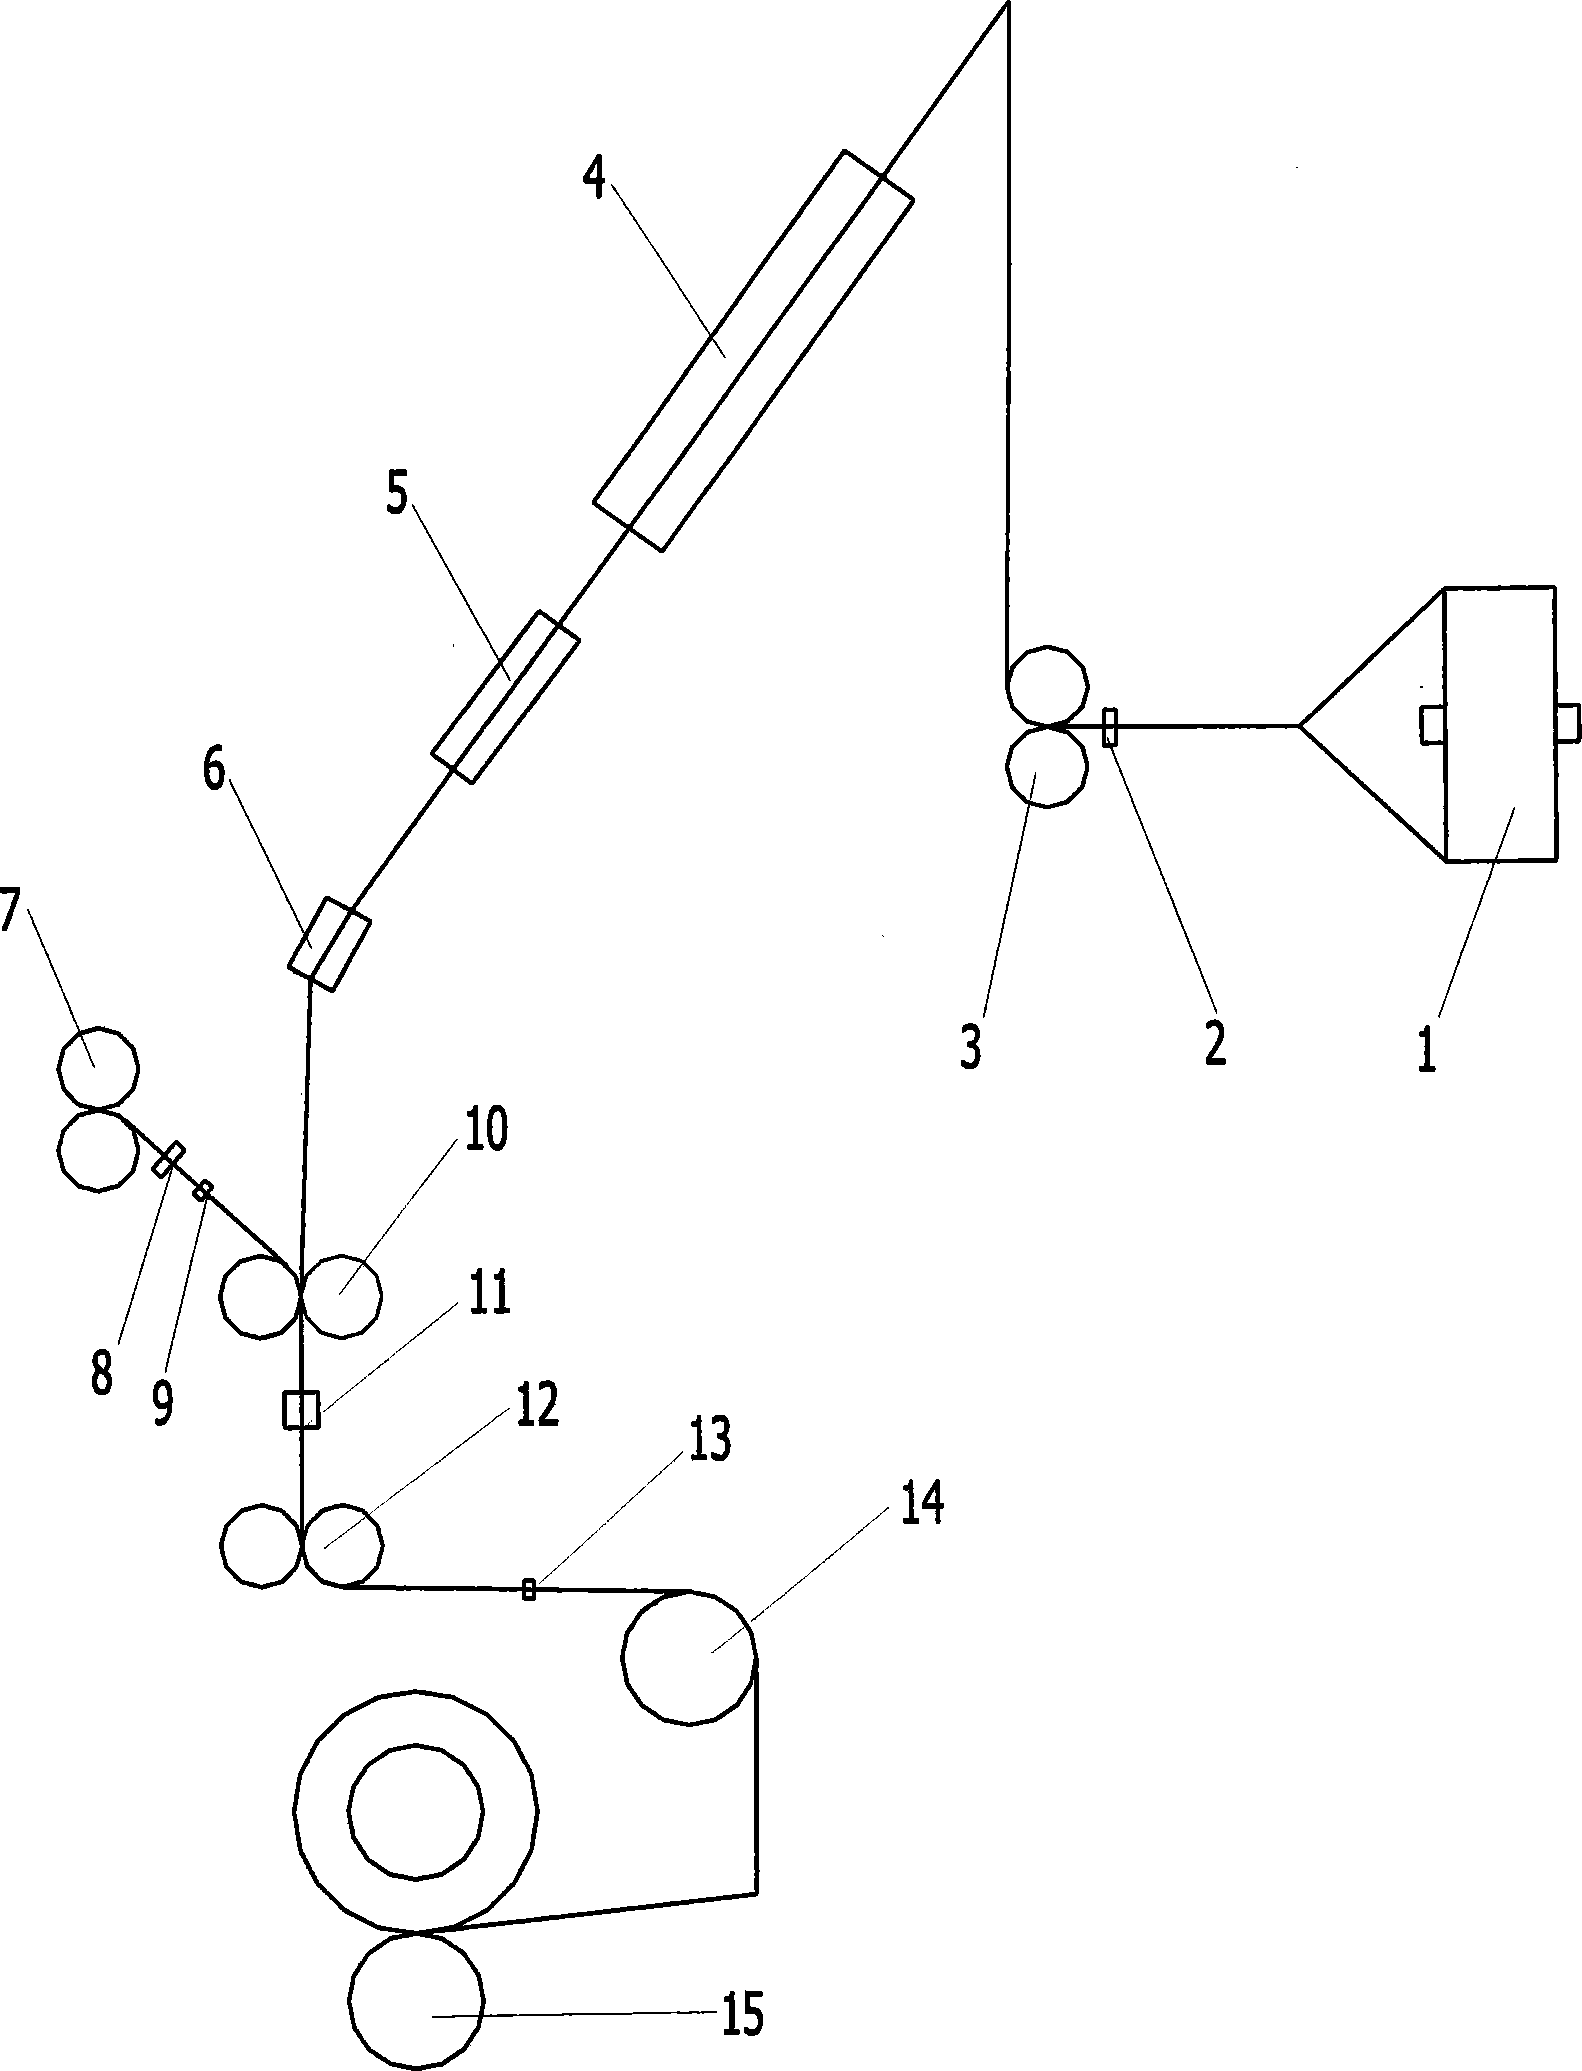 Method for manufacturing nylon/spandex air-textured yarn by false twist texturing machine one-step method